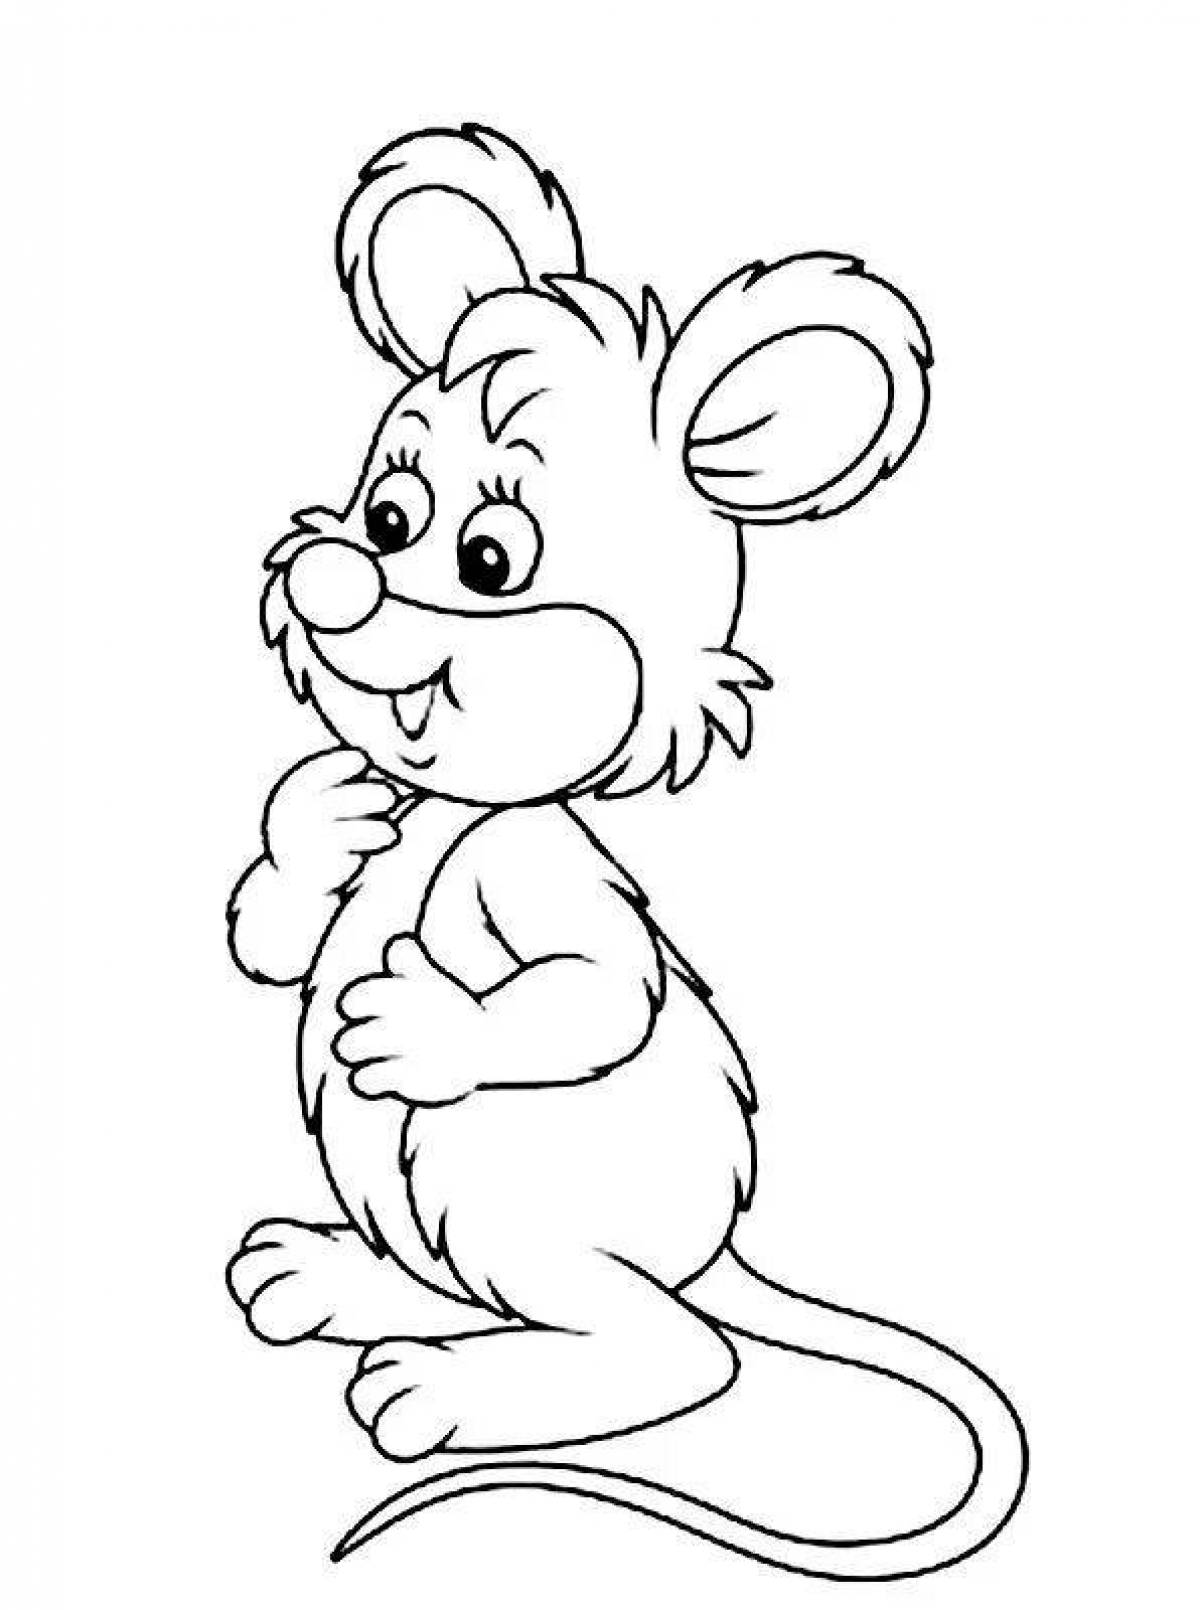 For kids mouse 3 4 years old #2